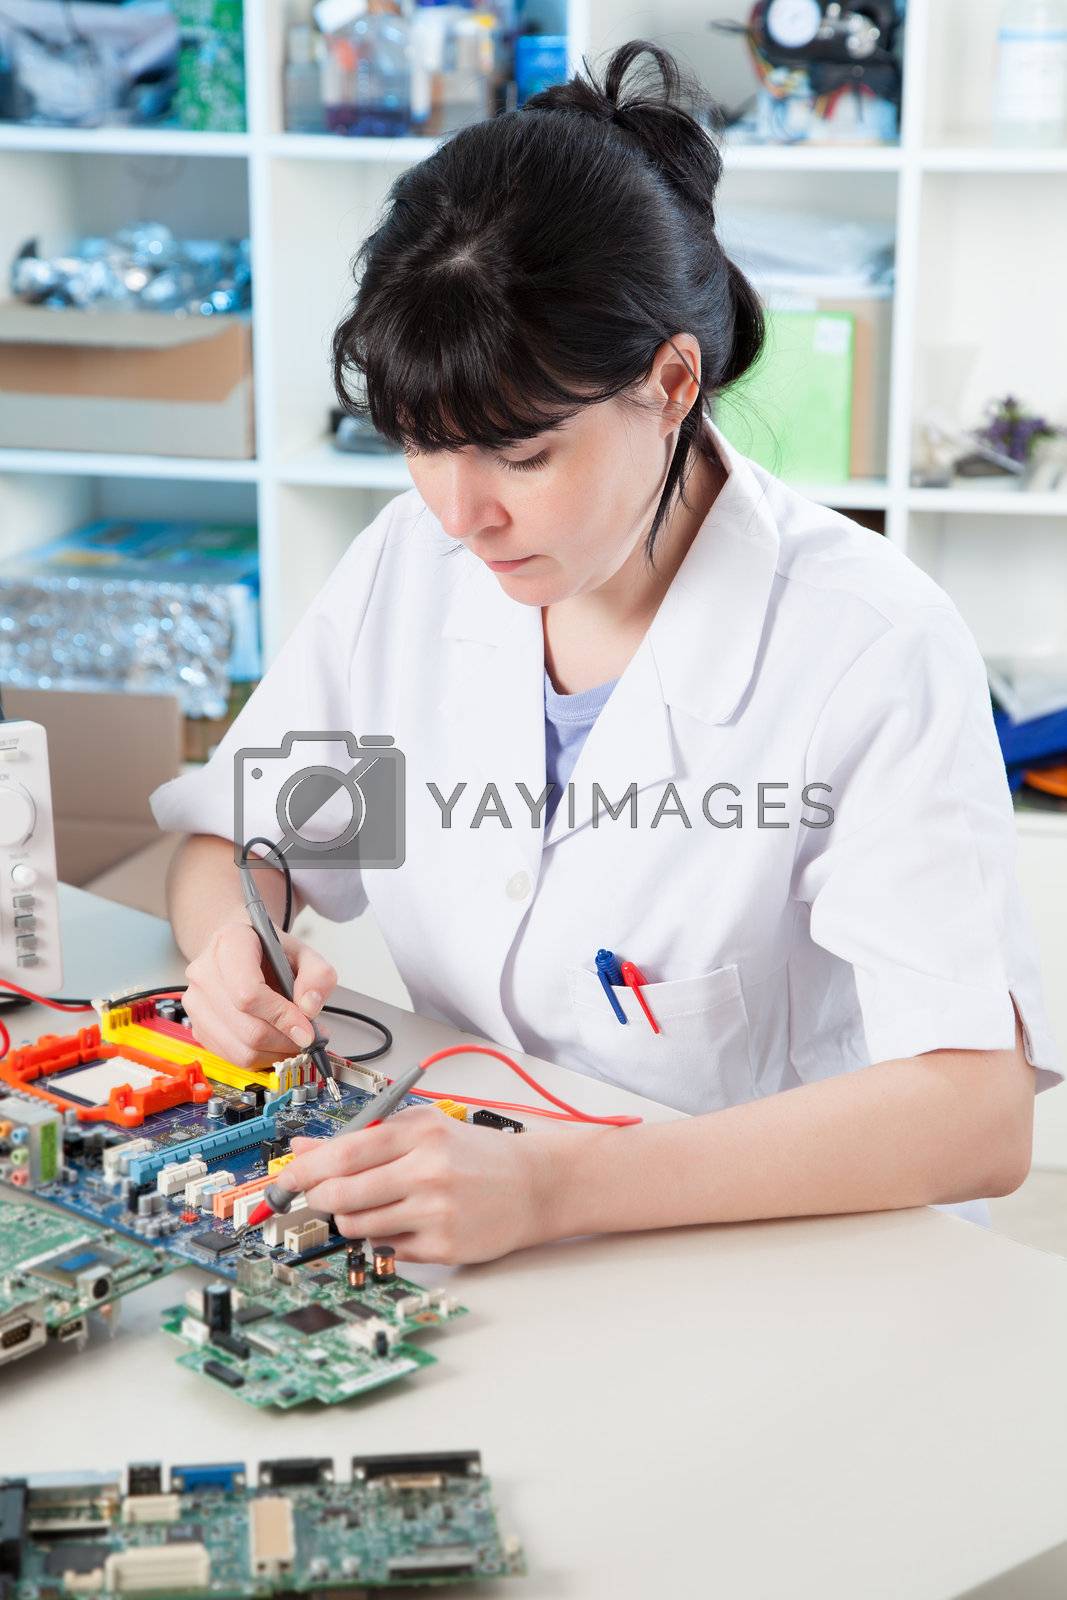 Royalty free image of Girl debugging an electronic precision device by motorolka